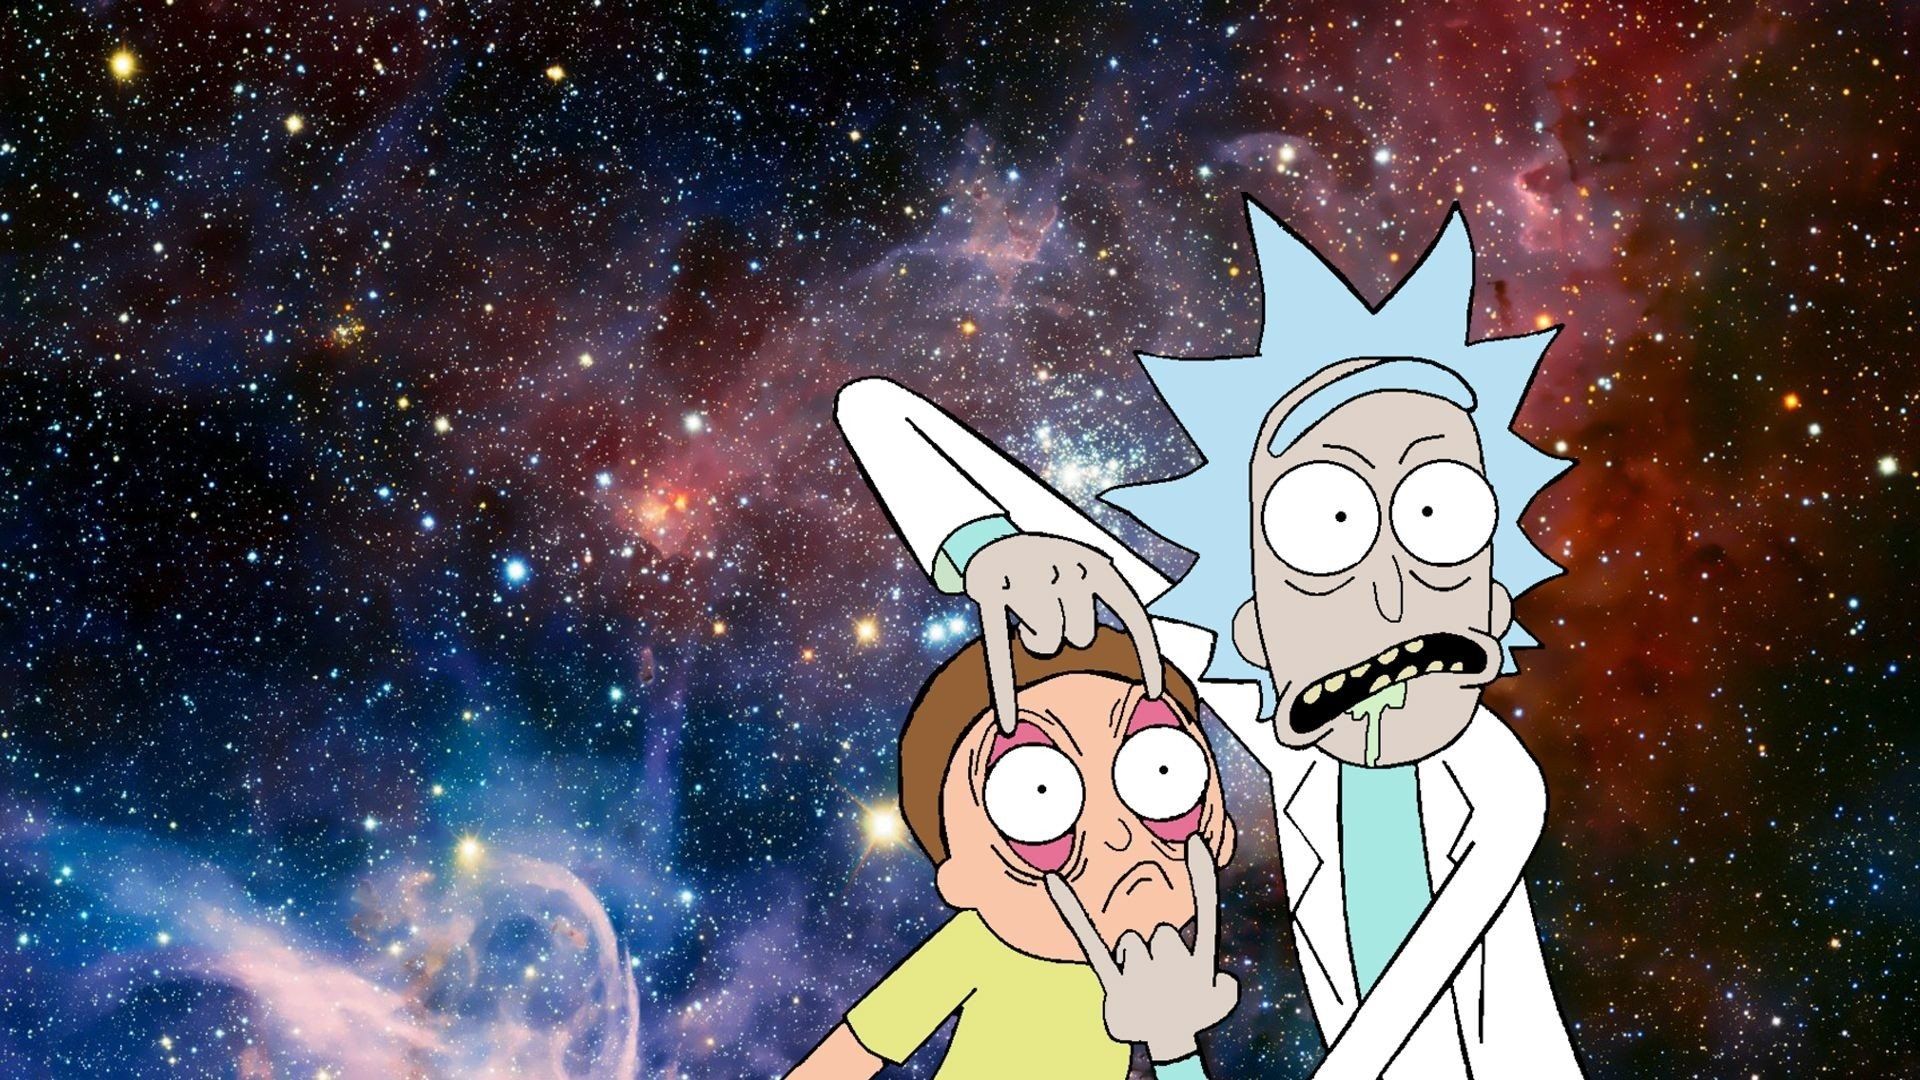 Rick and Morty Trippy wallpaper